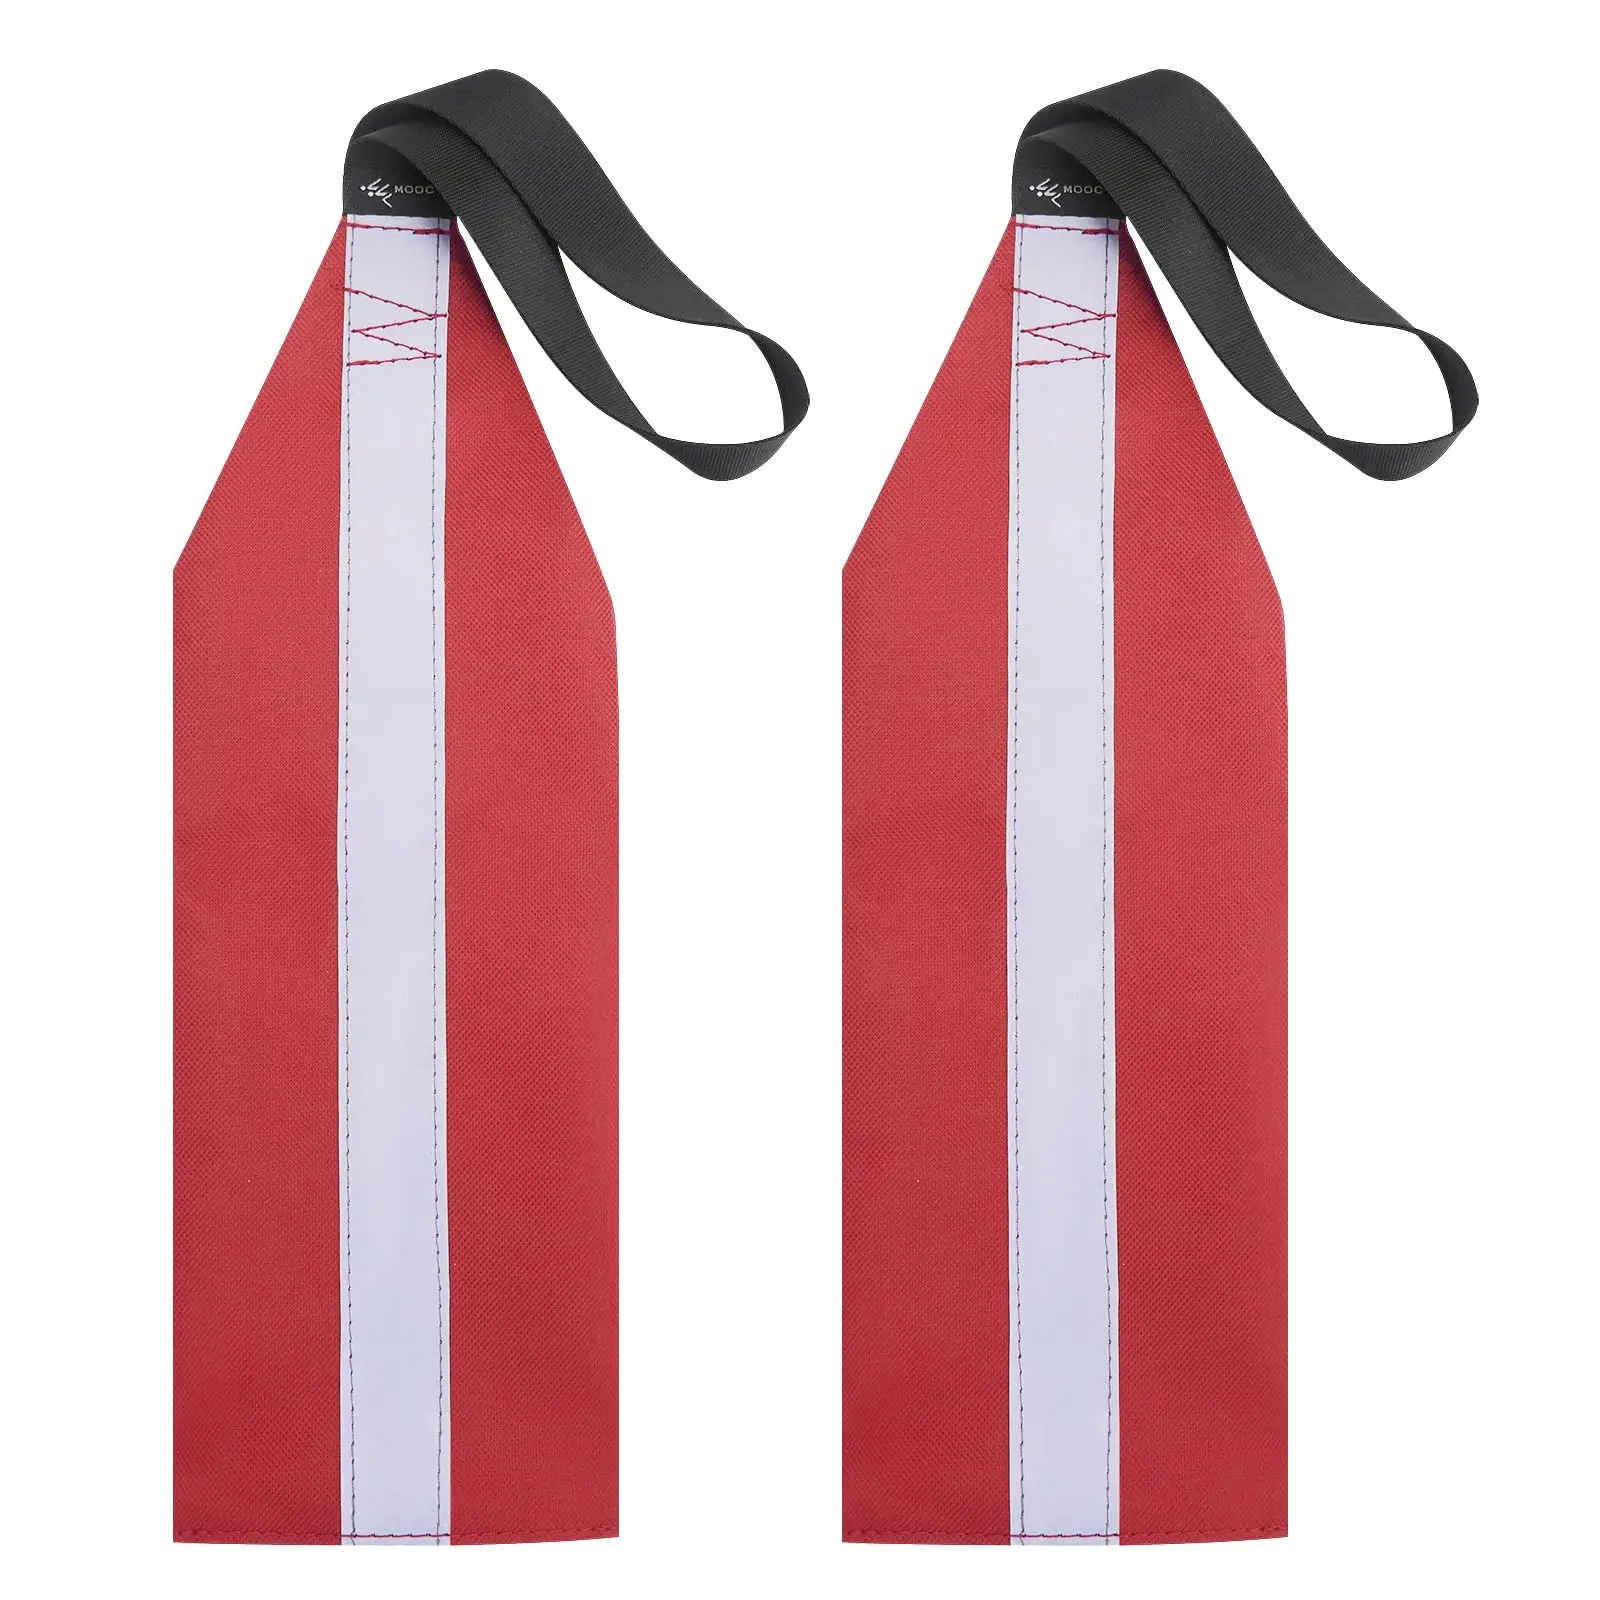 Red Flag Truck Loads (Pack of 2), Warning Flags for Kayak Safety Towing,Travel Trailer Tow Accessories seahi aluminum alloy boat paddle for kayak jet ski and canoe paddles small safety boat water sport accessories